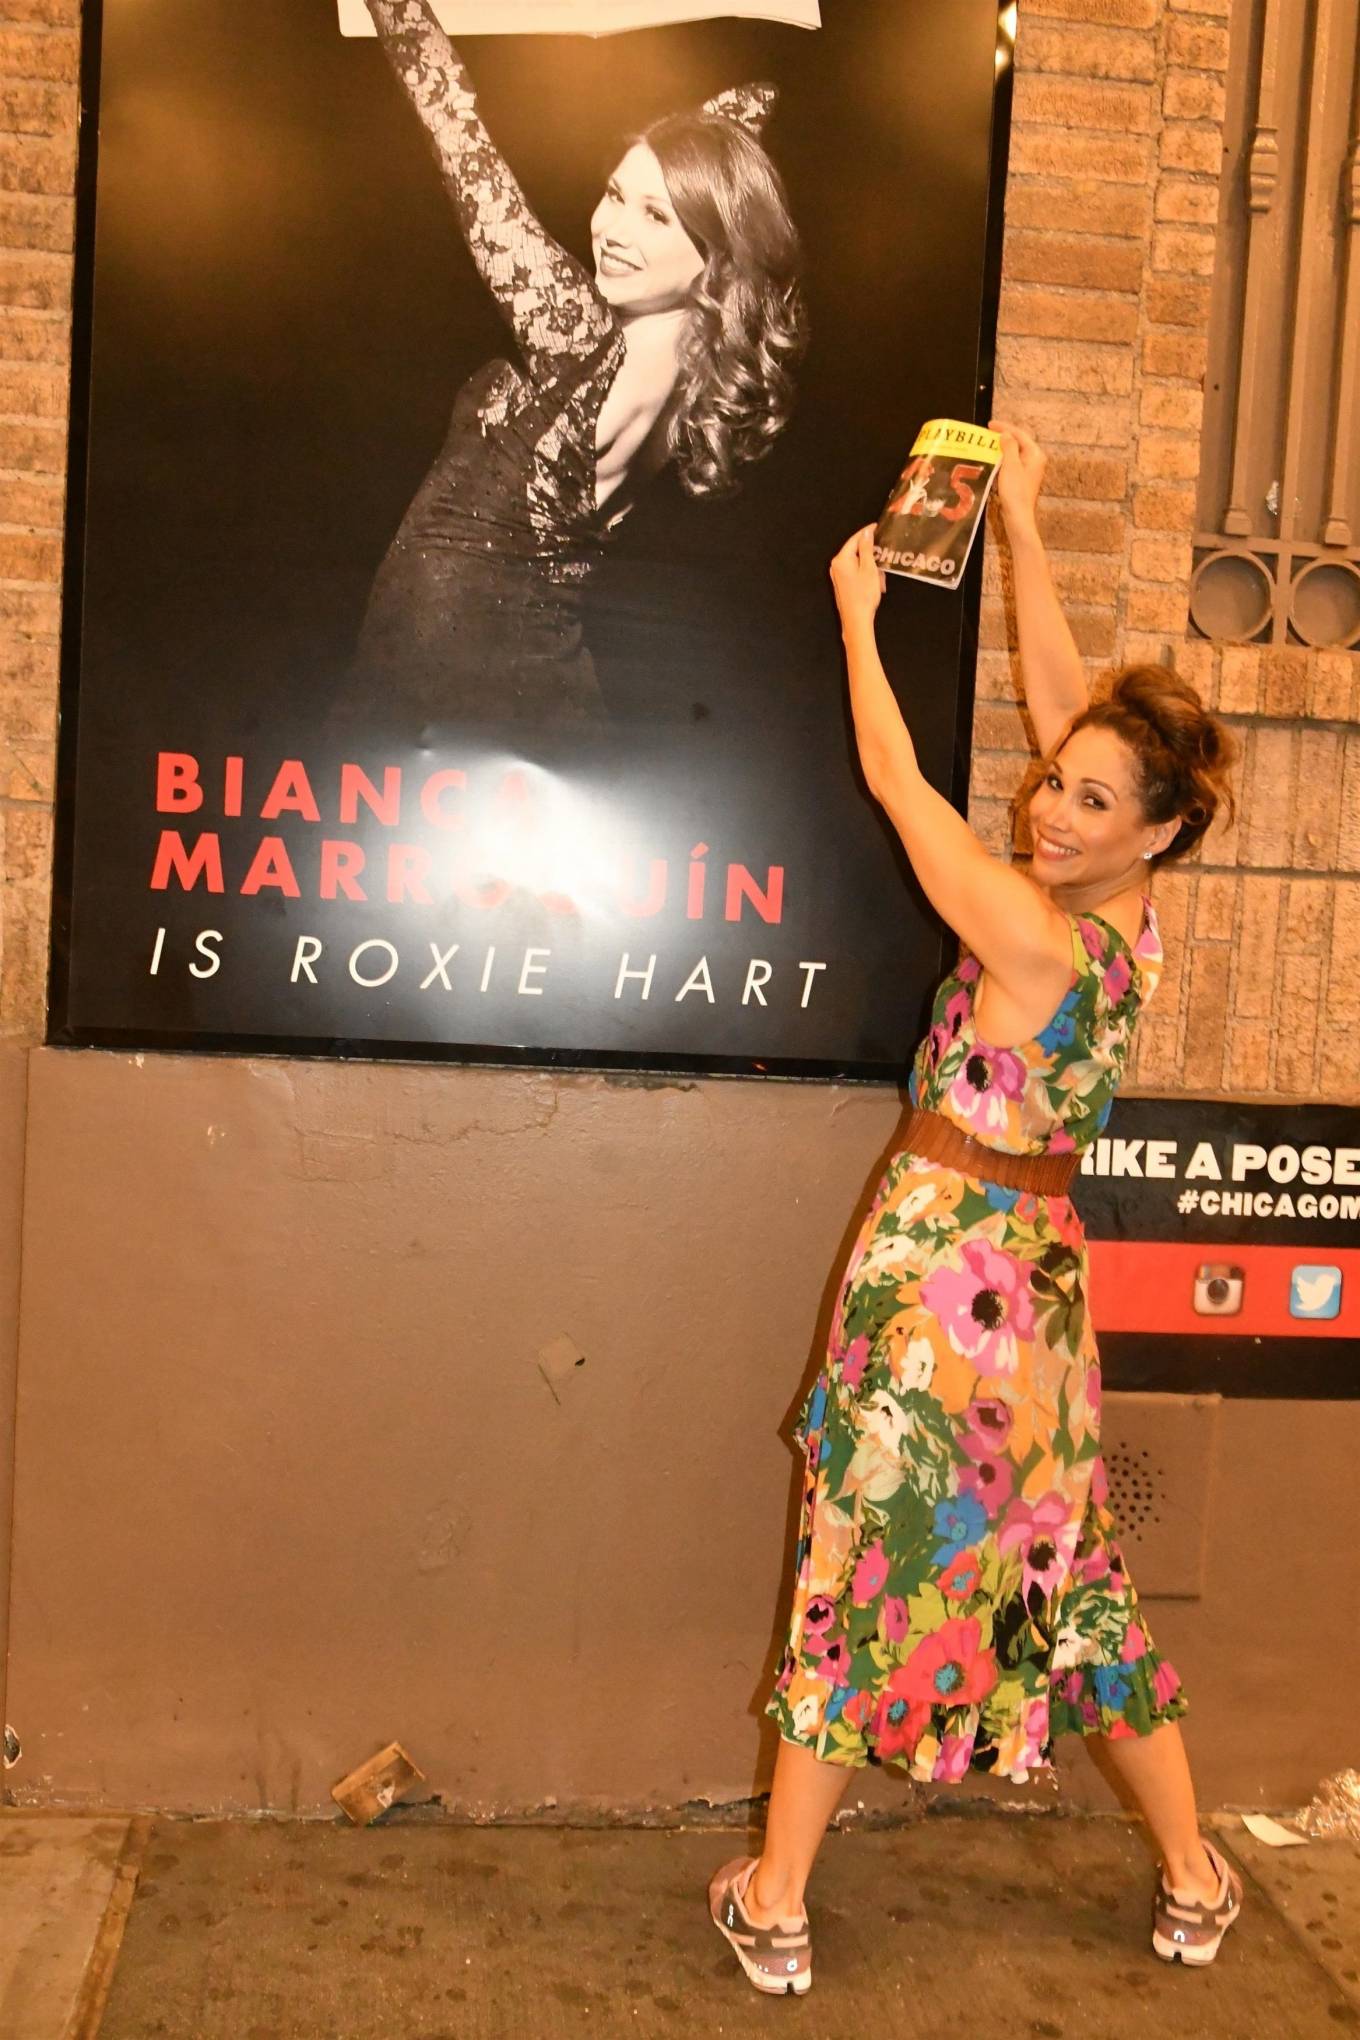 Bianca Marroquin - Poses next to her Chicago poster in New York